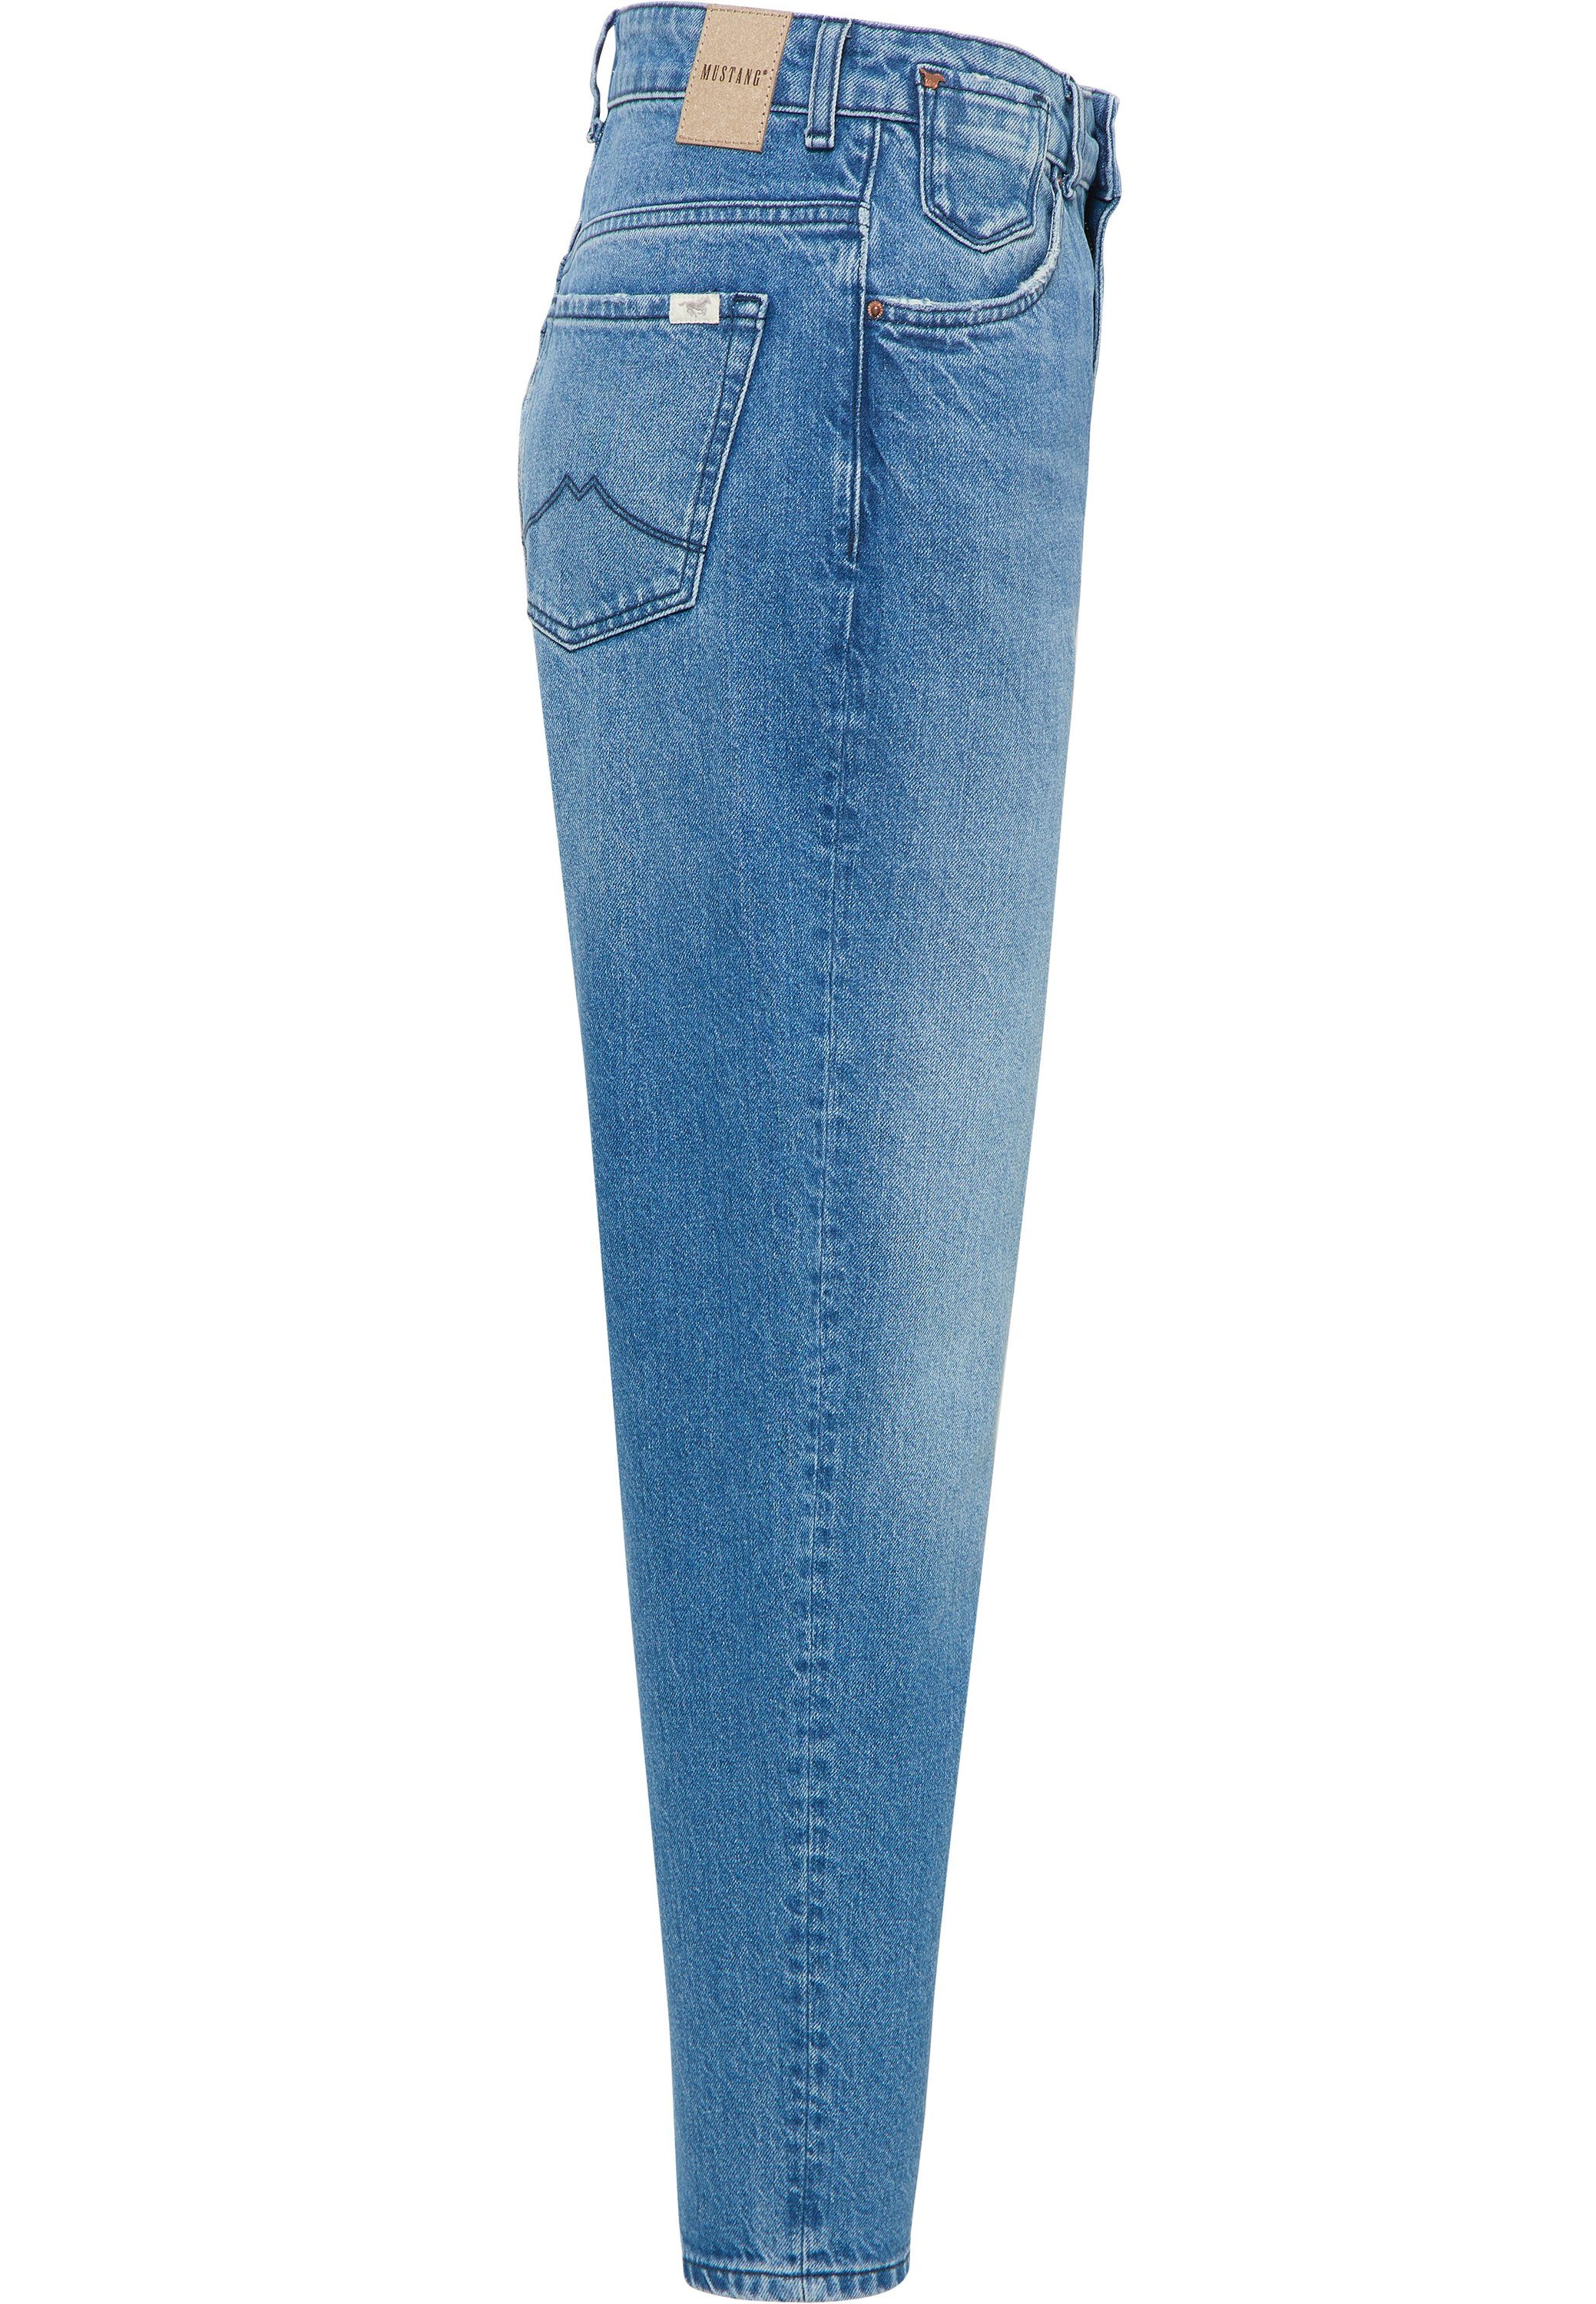 MUSTANG 5-Pocket-Jeans Style Charlotte Tapered Mustang